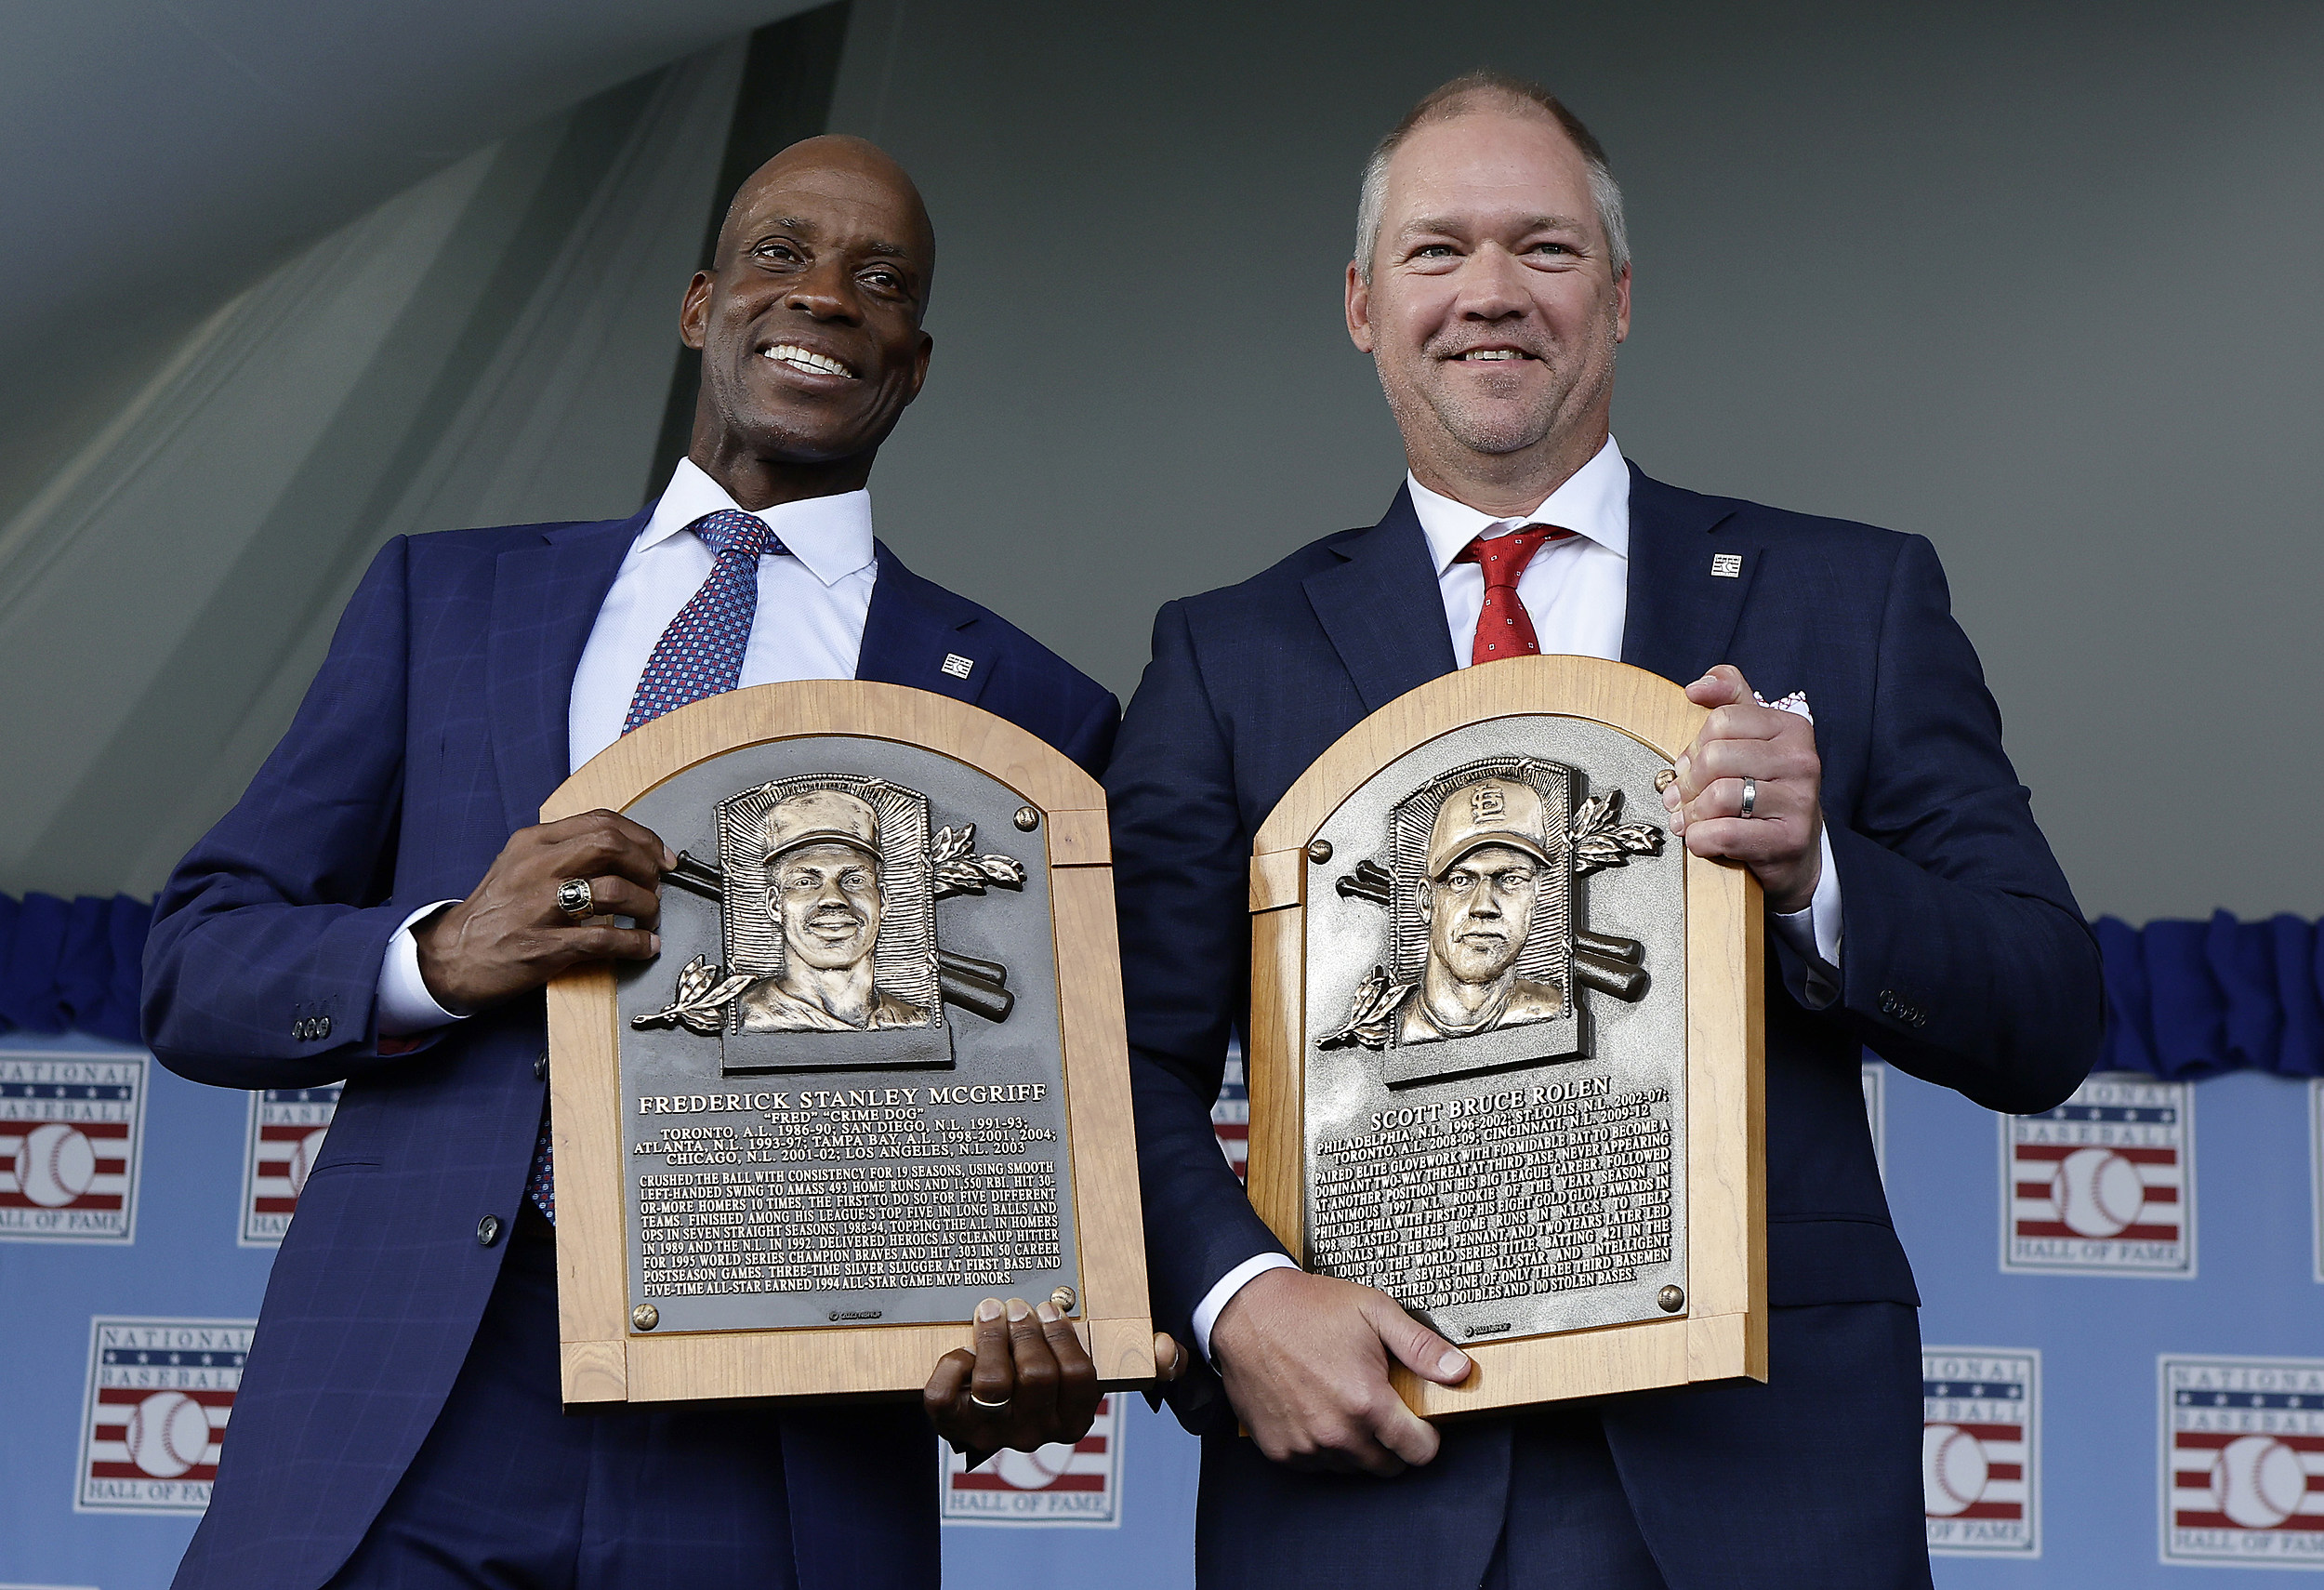 Page 2: Rickey Henderson's Hall of Fame plaque - ESPN Page 2